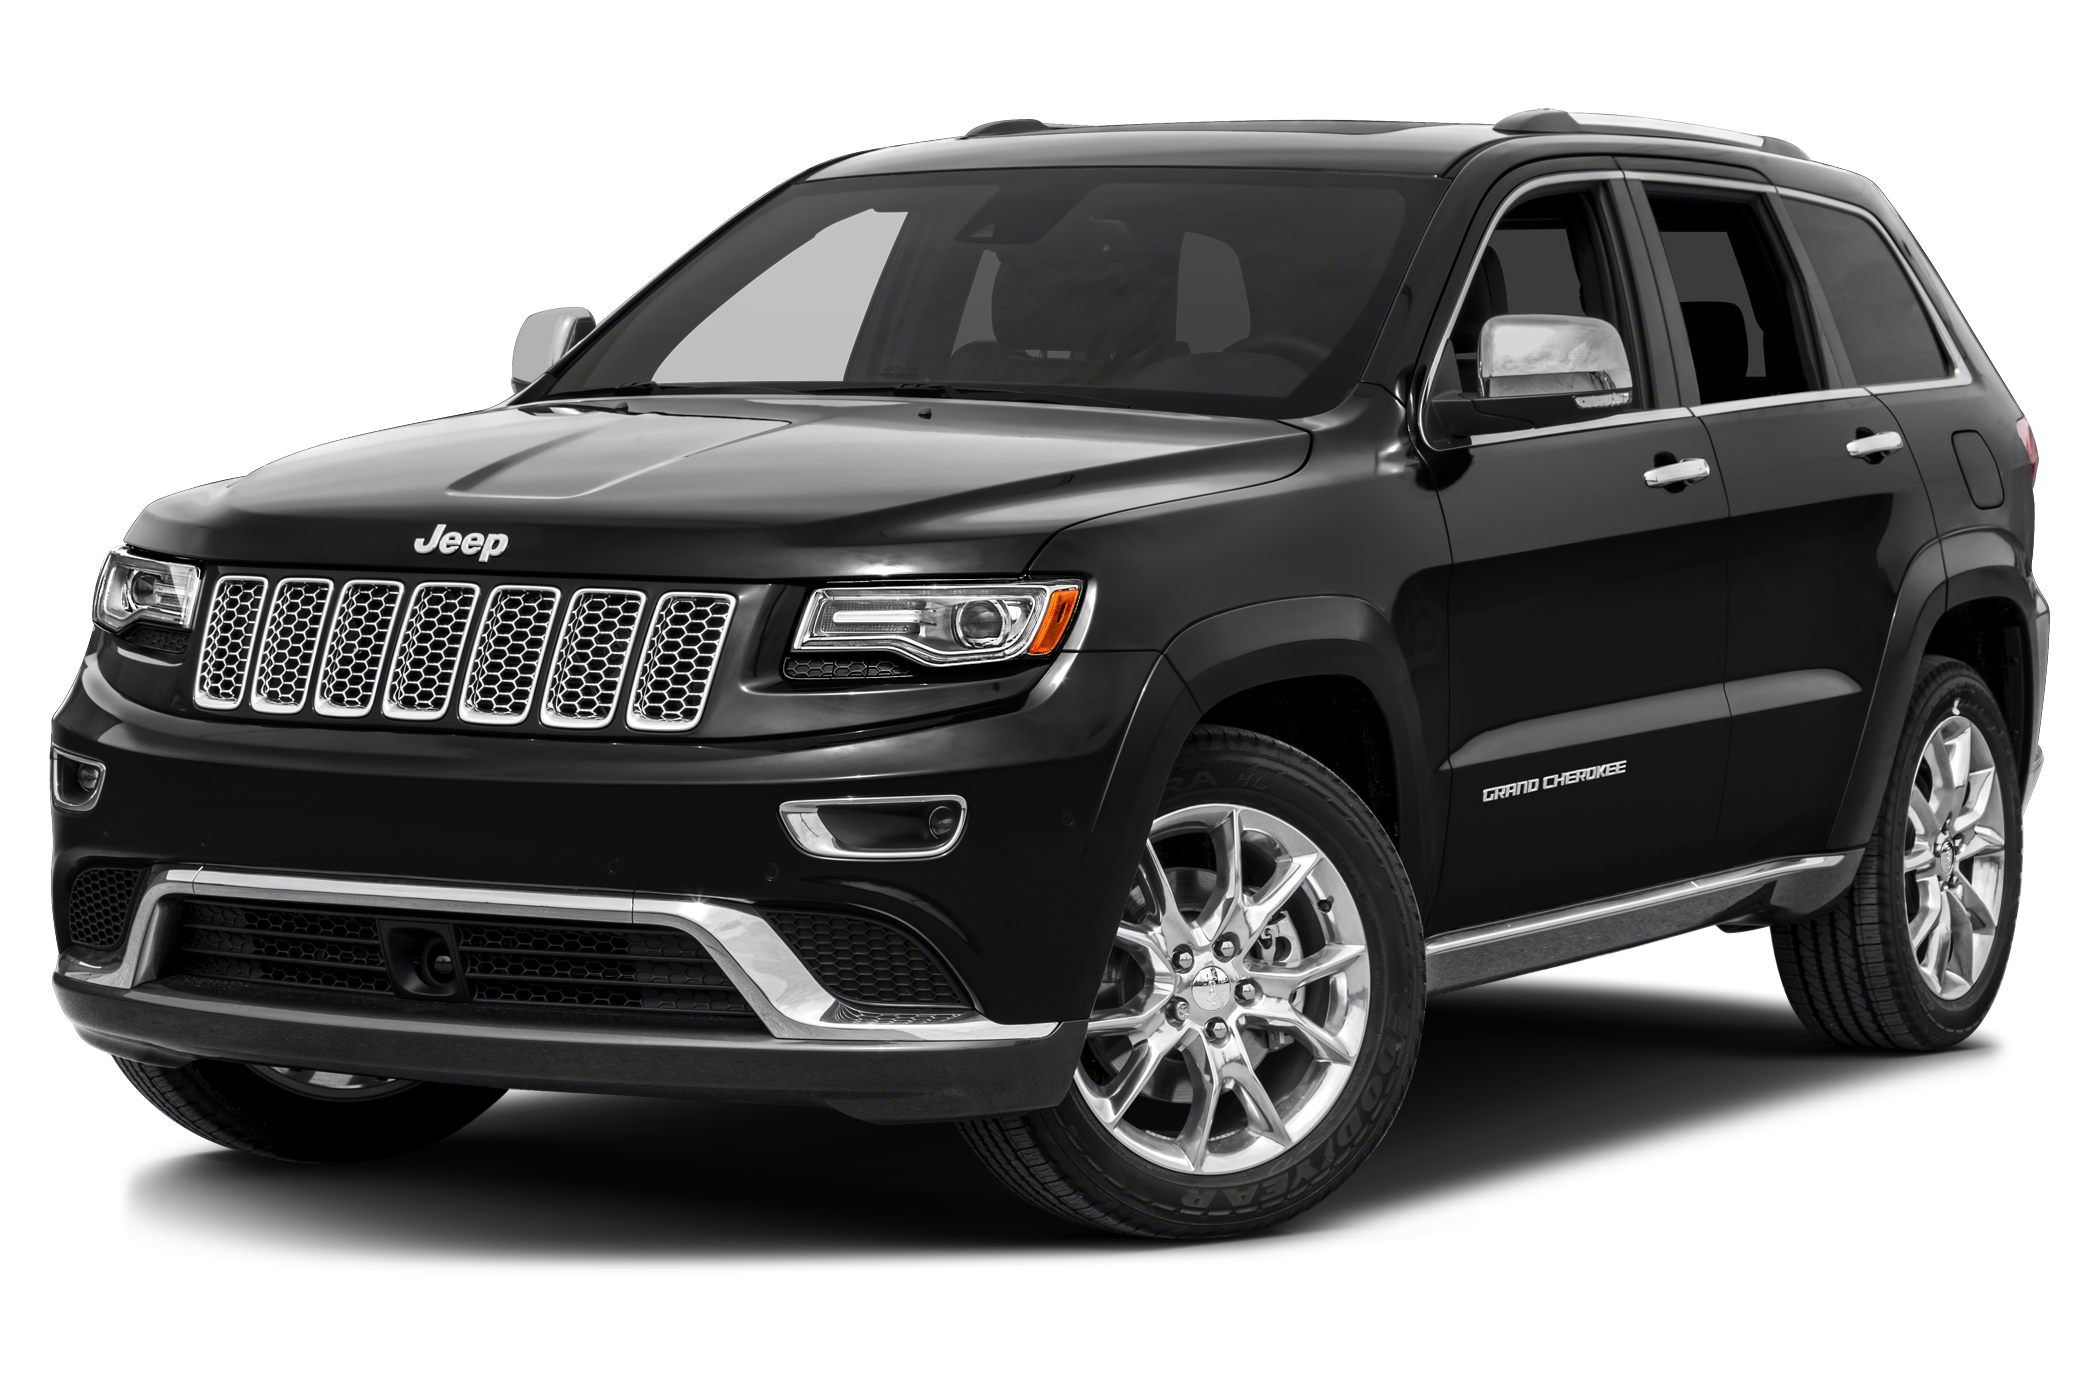 2014 Jeep Grand Cherokee Summit 4dr 4x4 Pictures